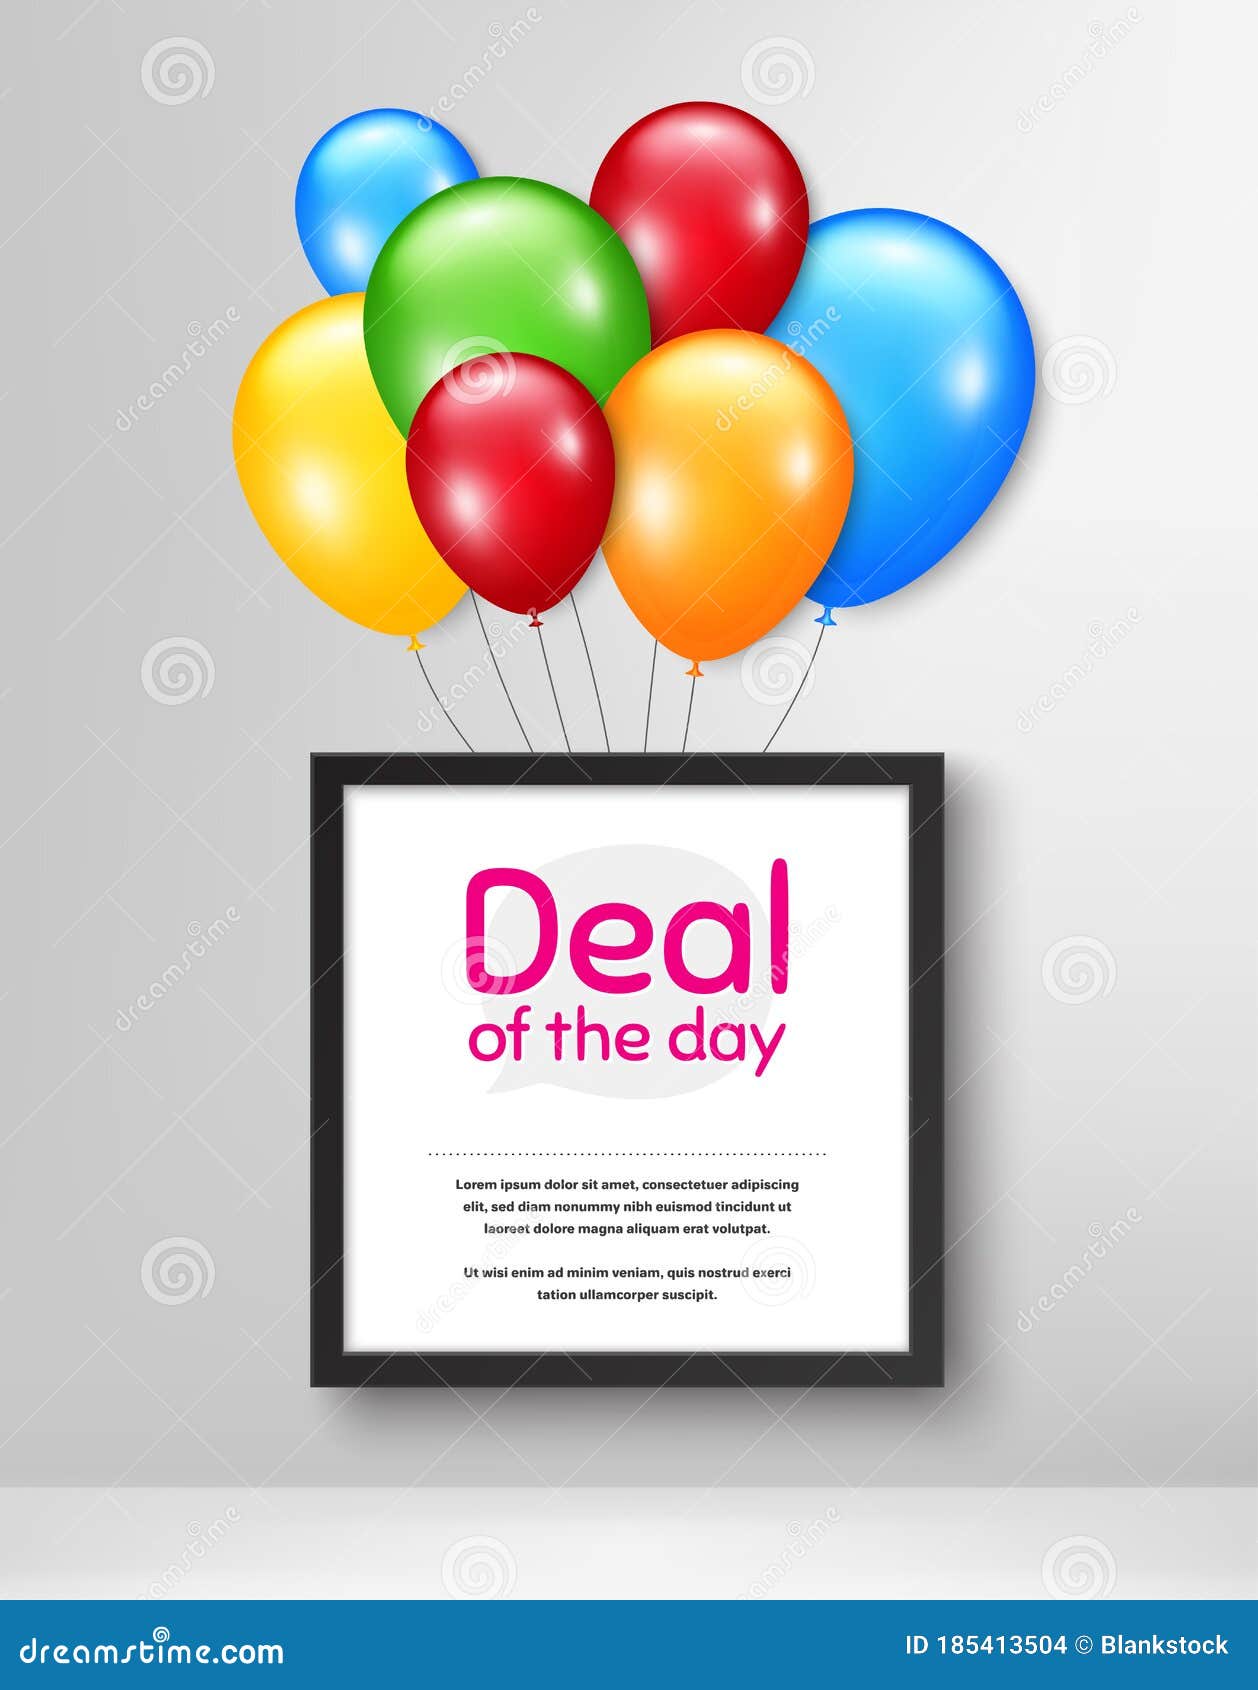 https://thumbs.dreamstime.com/z/deal-day-symbol-special-offer-price-sign-vector-black-frame-balloons-advertising-discounts-bunch-colorful-celebration-185413504.jpg